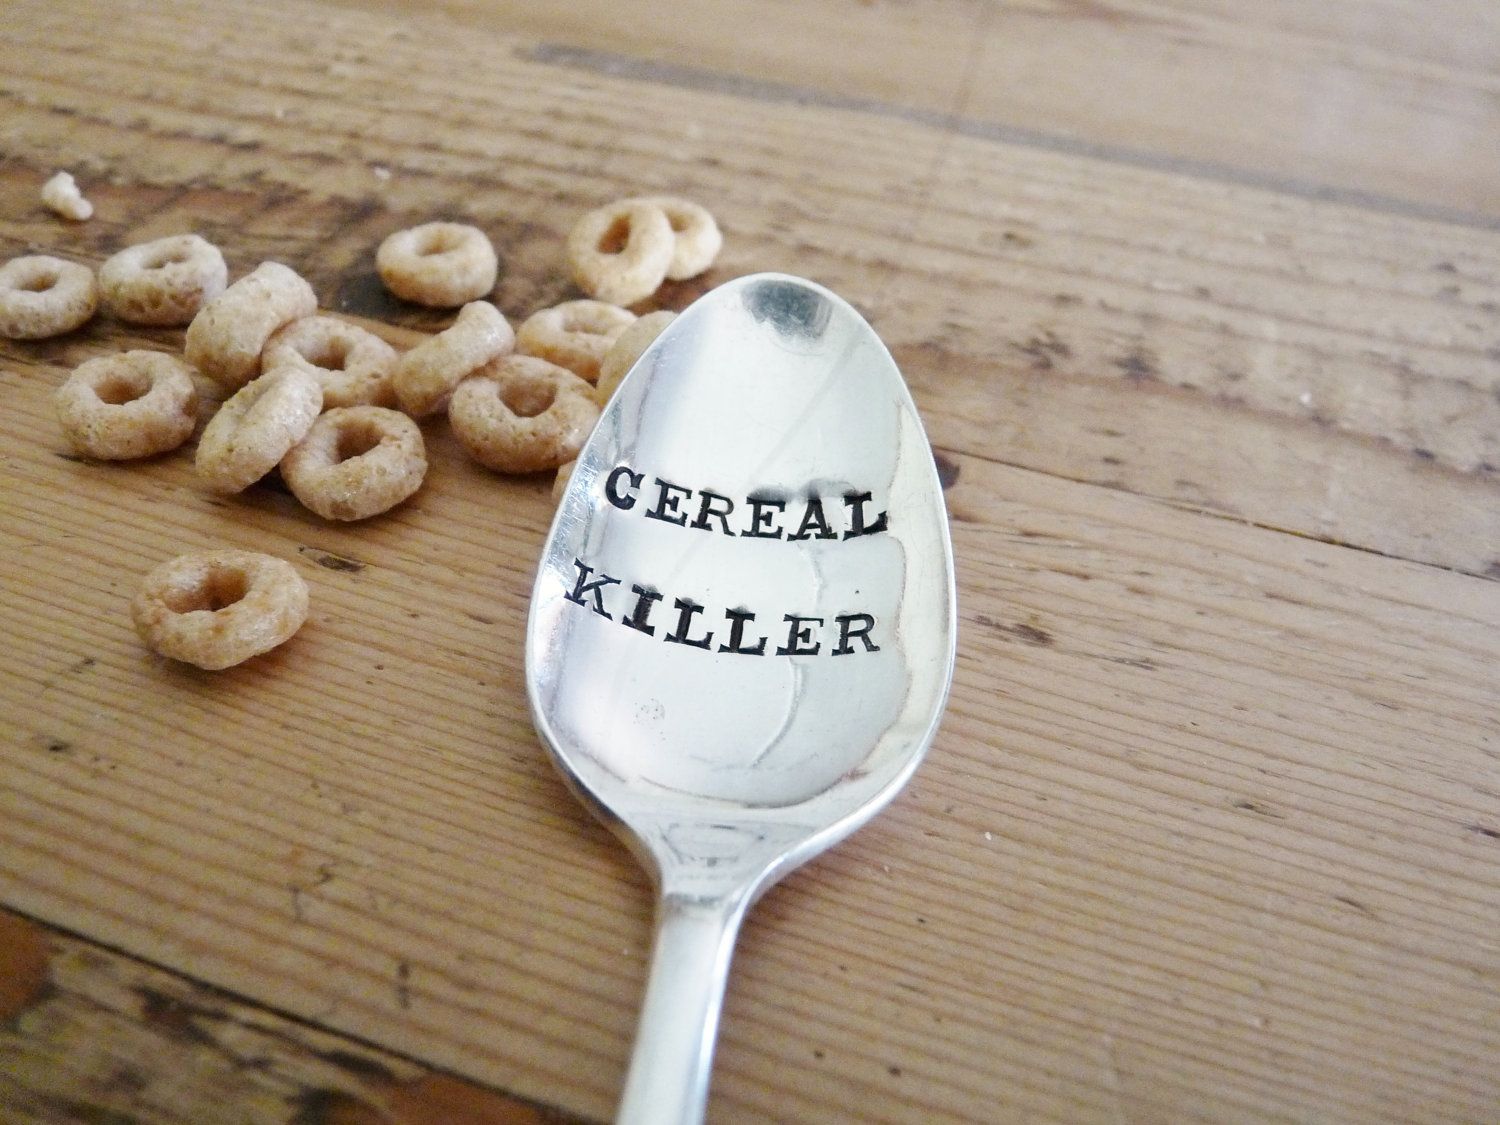 Funny Cereal and Milk Spoon - Cereal Killer Spoon